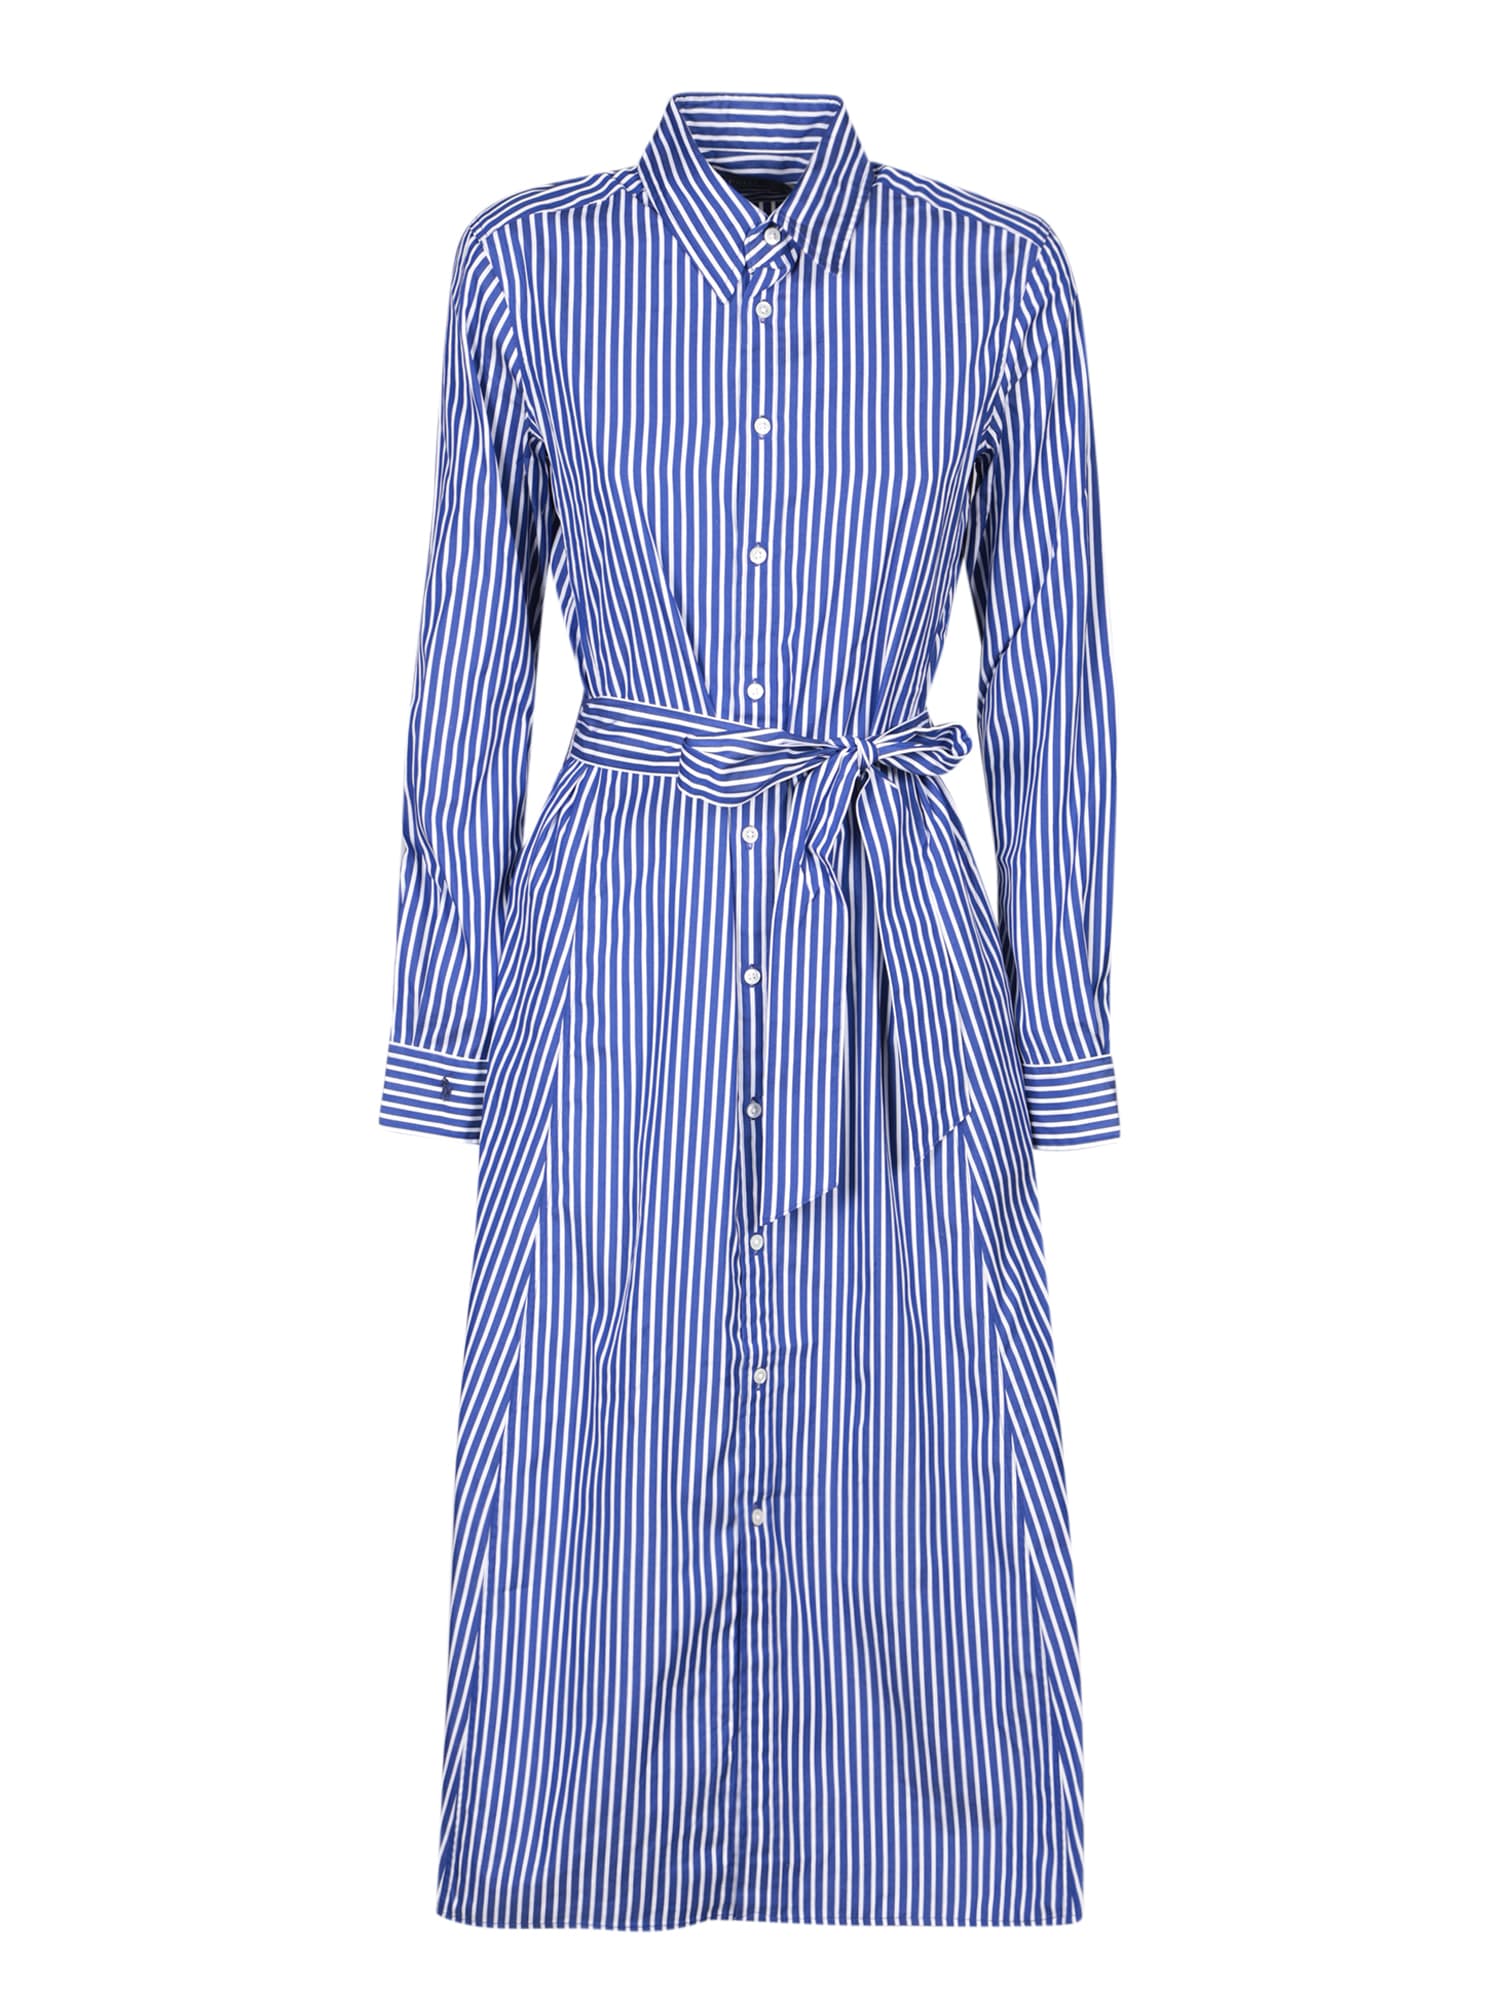 Blue And White Striped Chemisier Dress